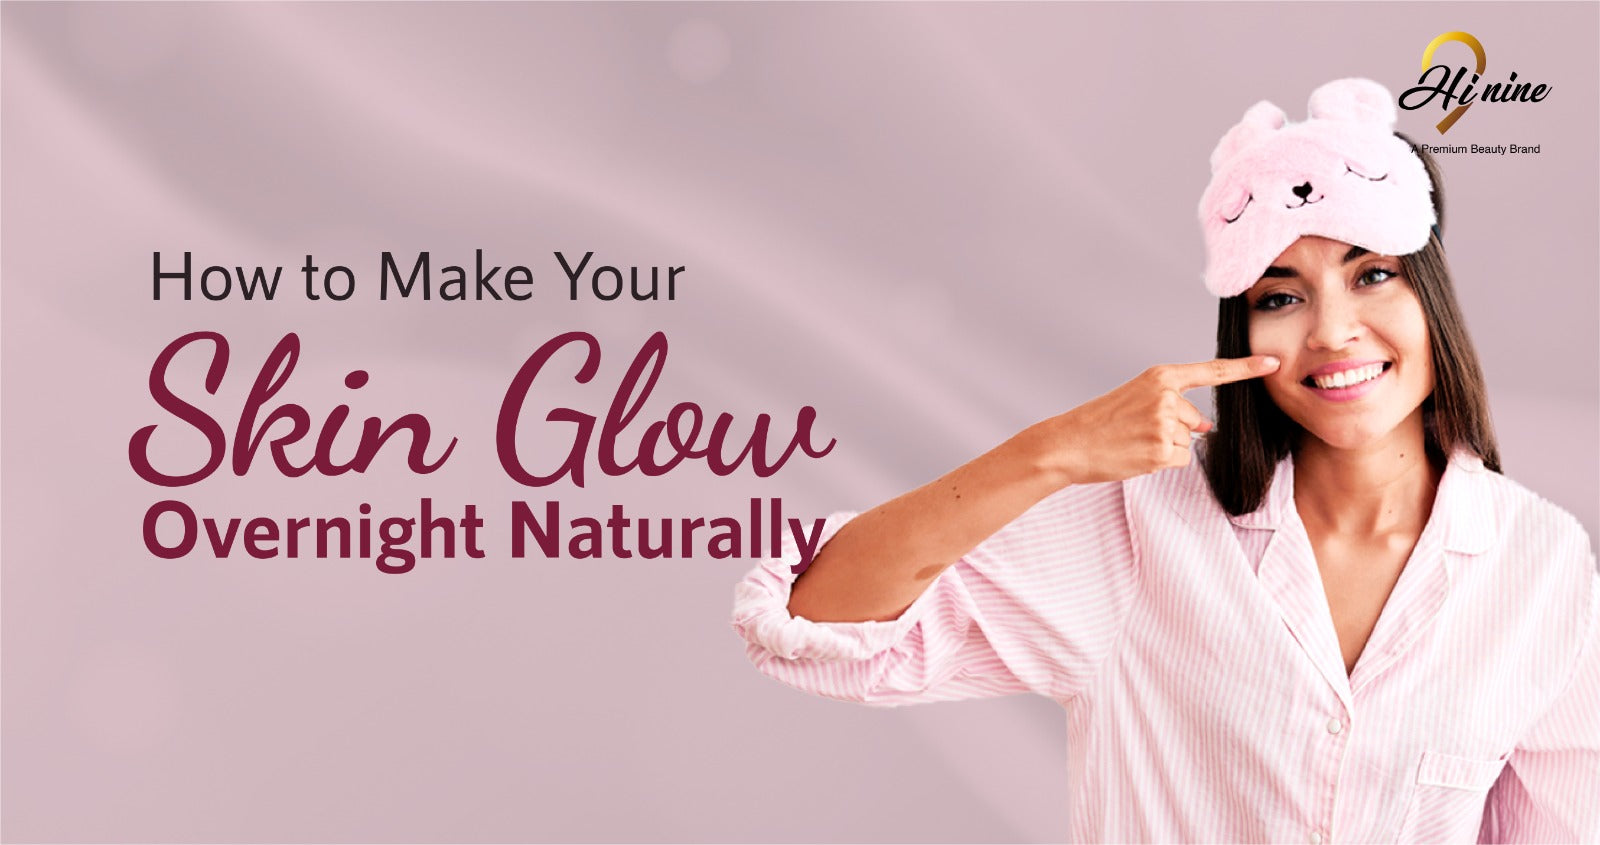 How to Make Your Skin Glow Overnight Naturally